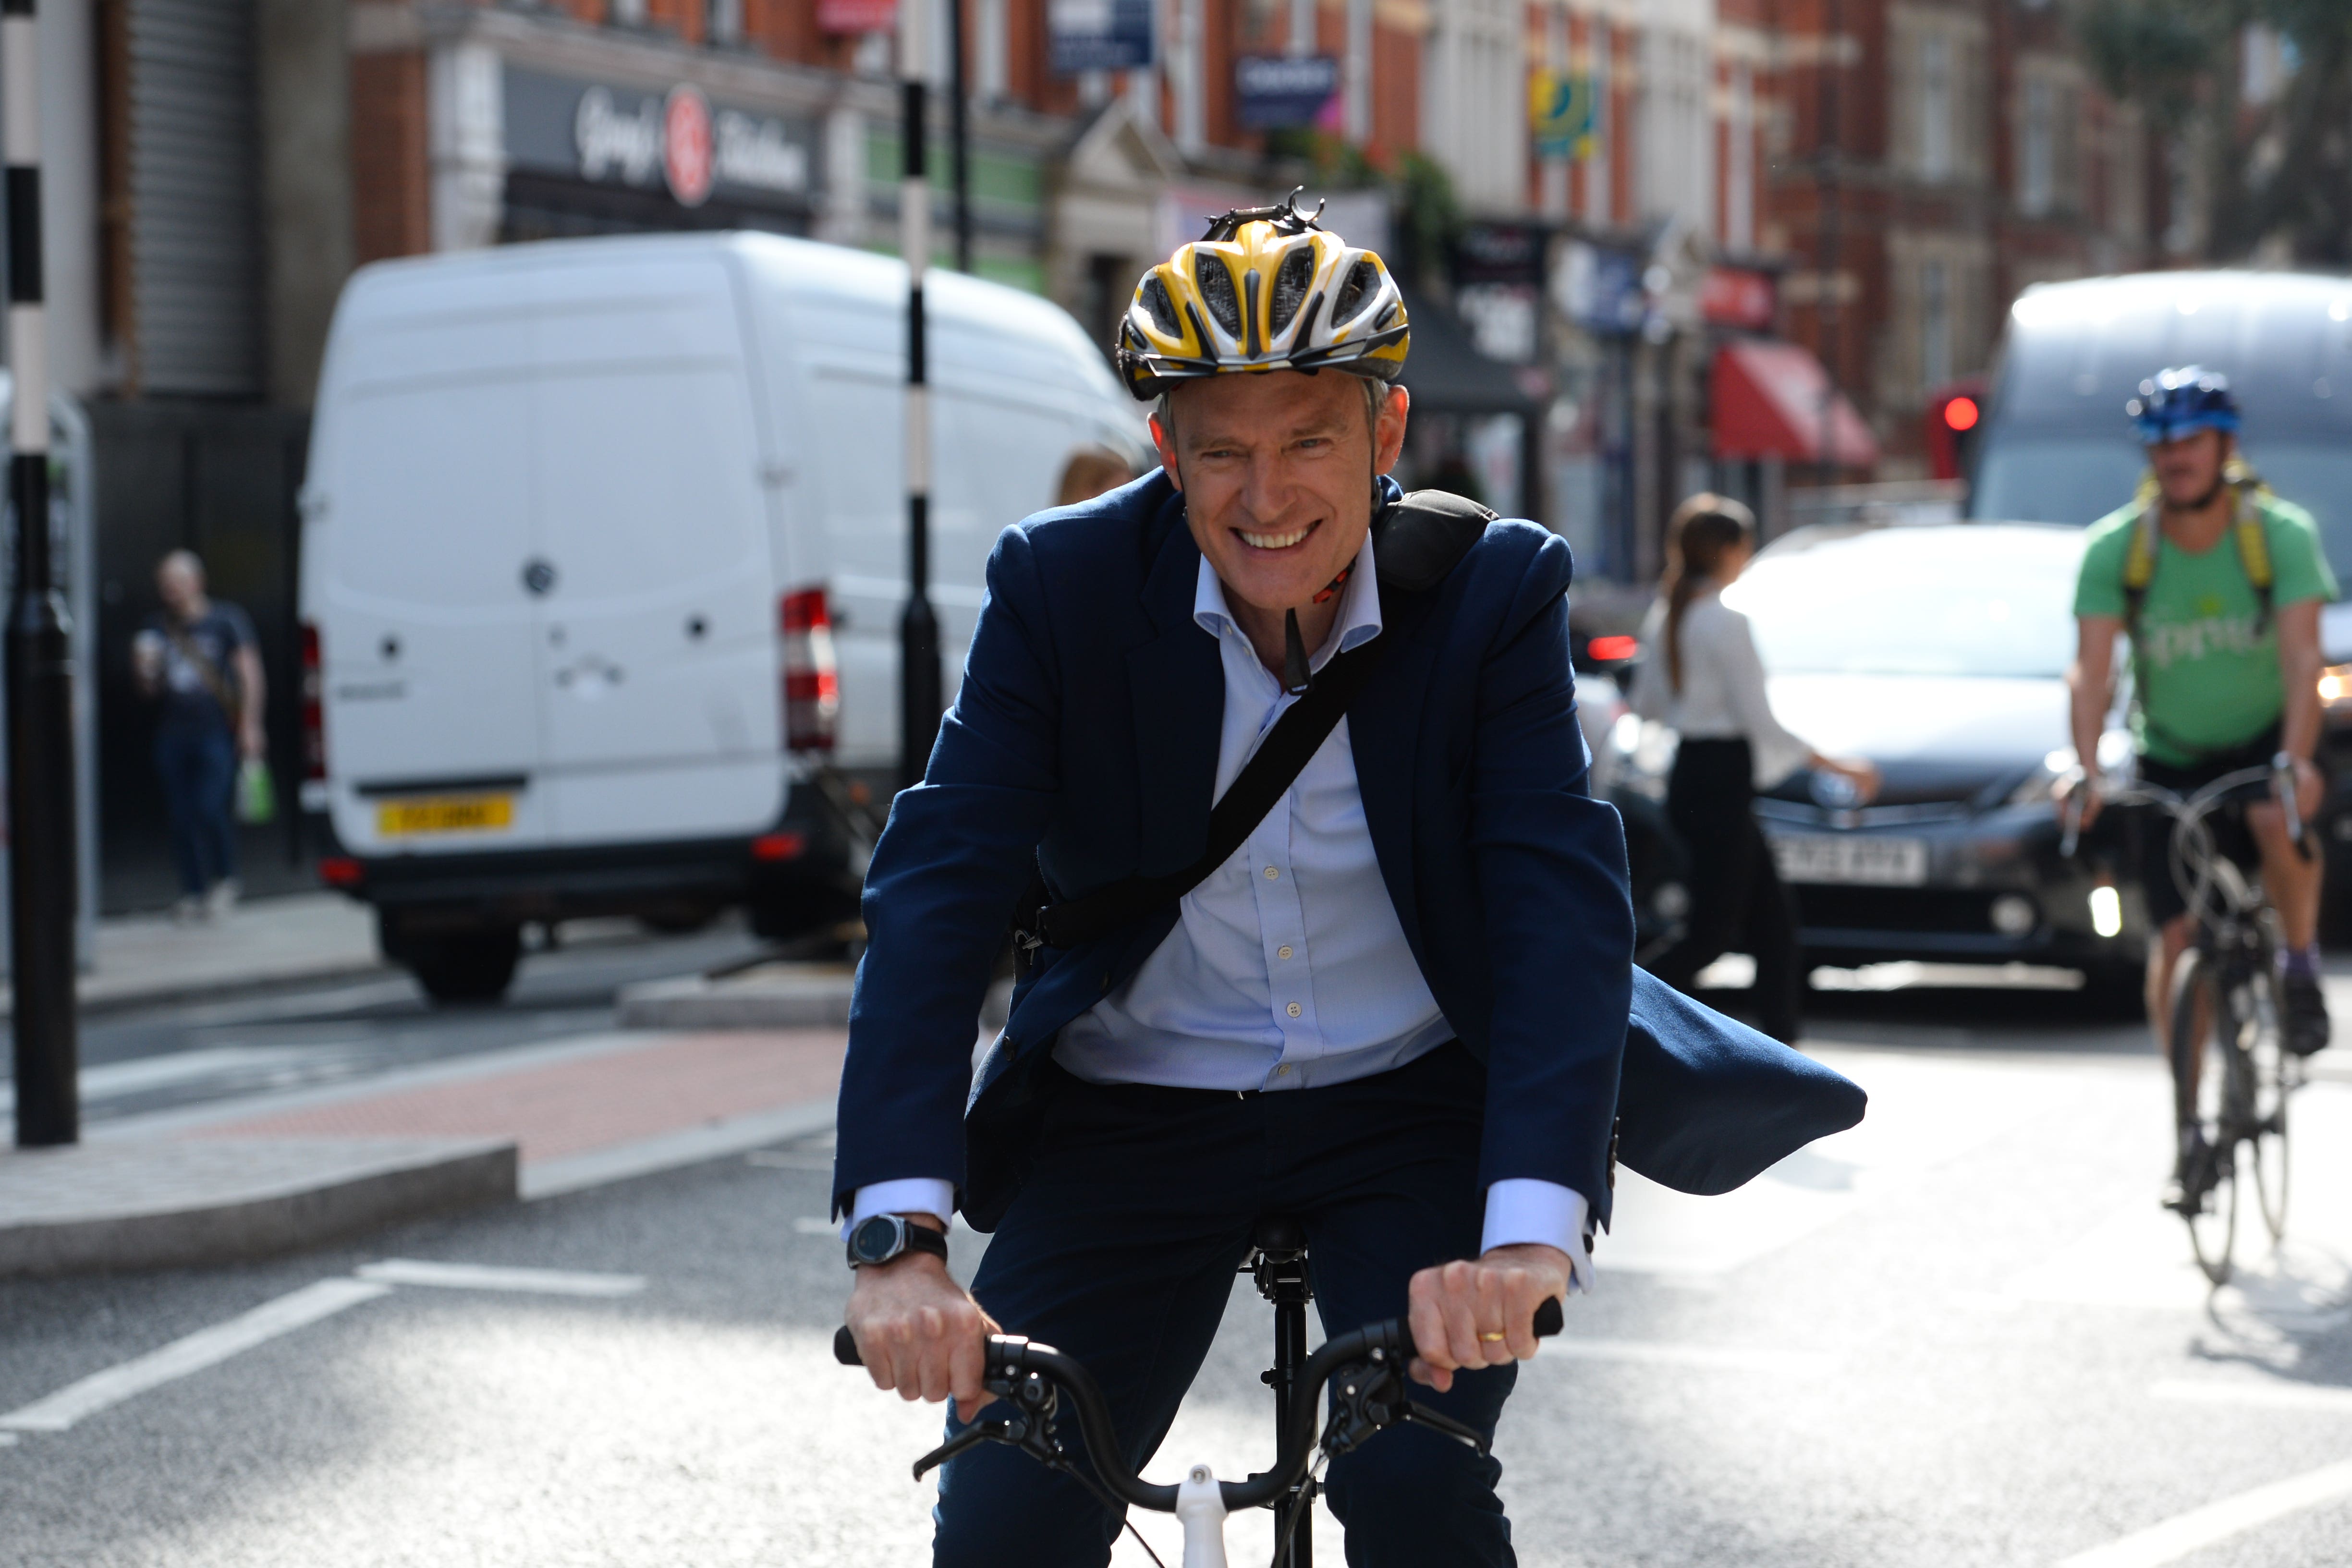 Drivers should let cyclists overtake them in cities, says Jeremy Vine The Independent